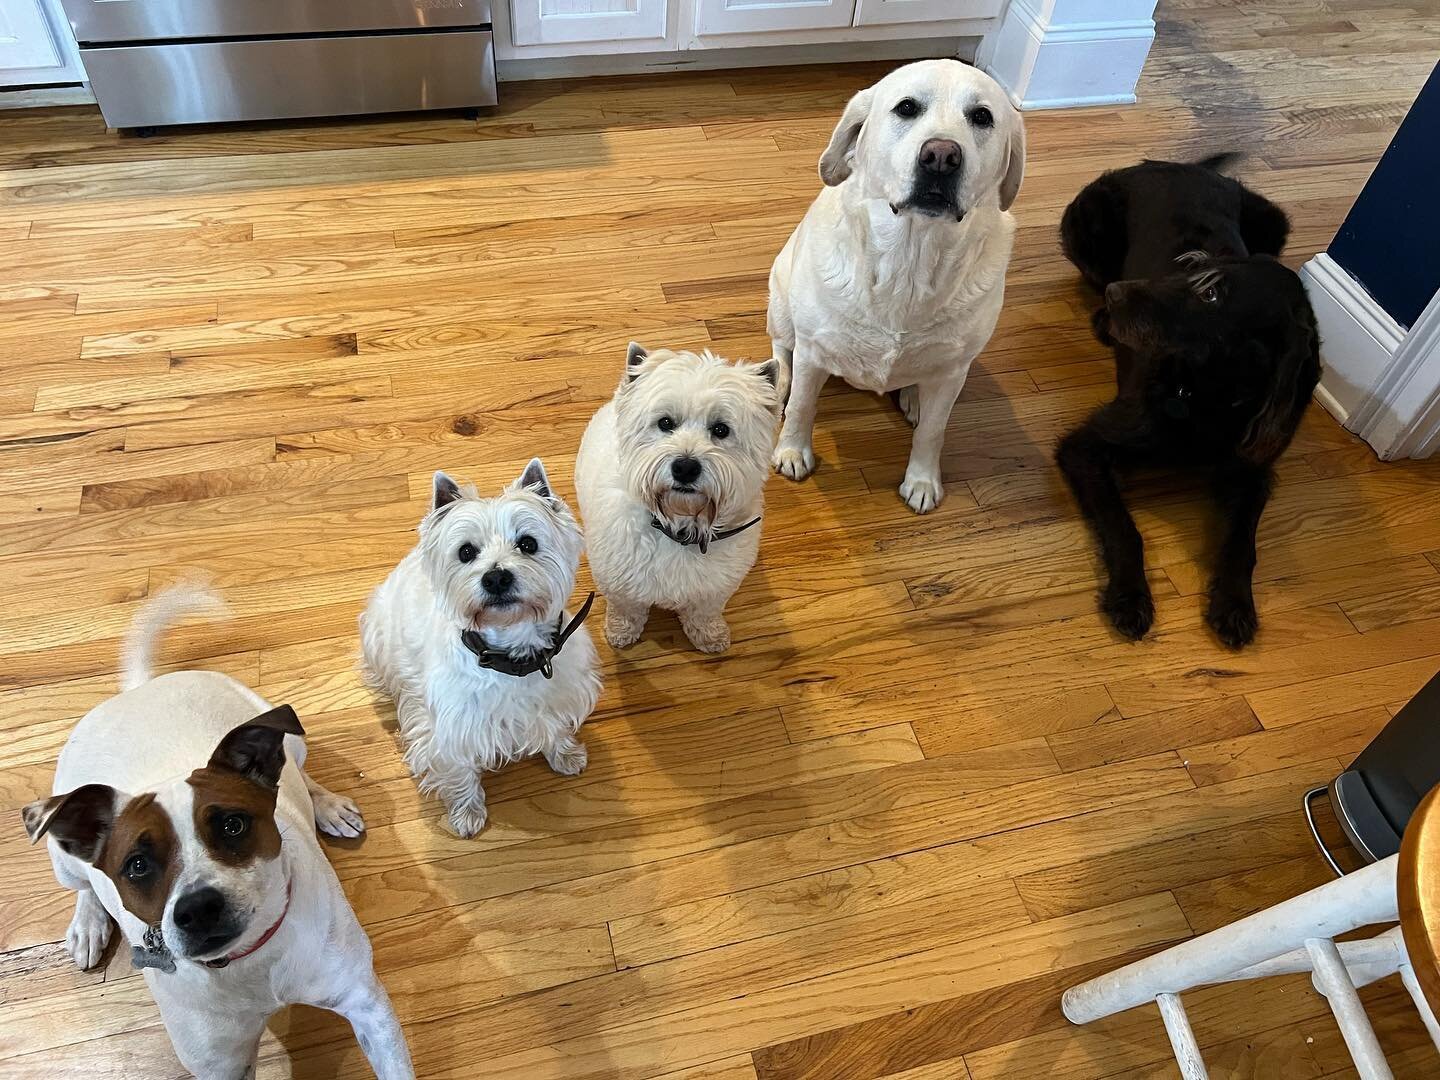 &quot;Got all my pups in a row&quot; 🤣😉🦮🐕🐶🐩🐕&zwj;🦺🐾